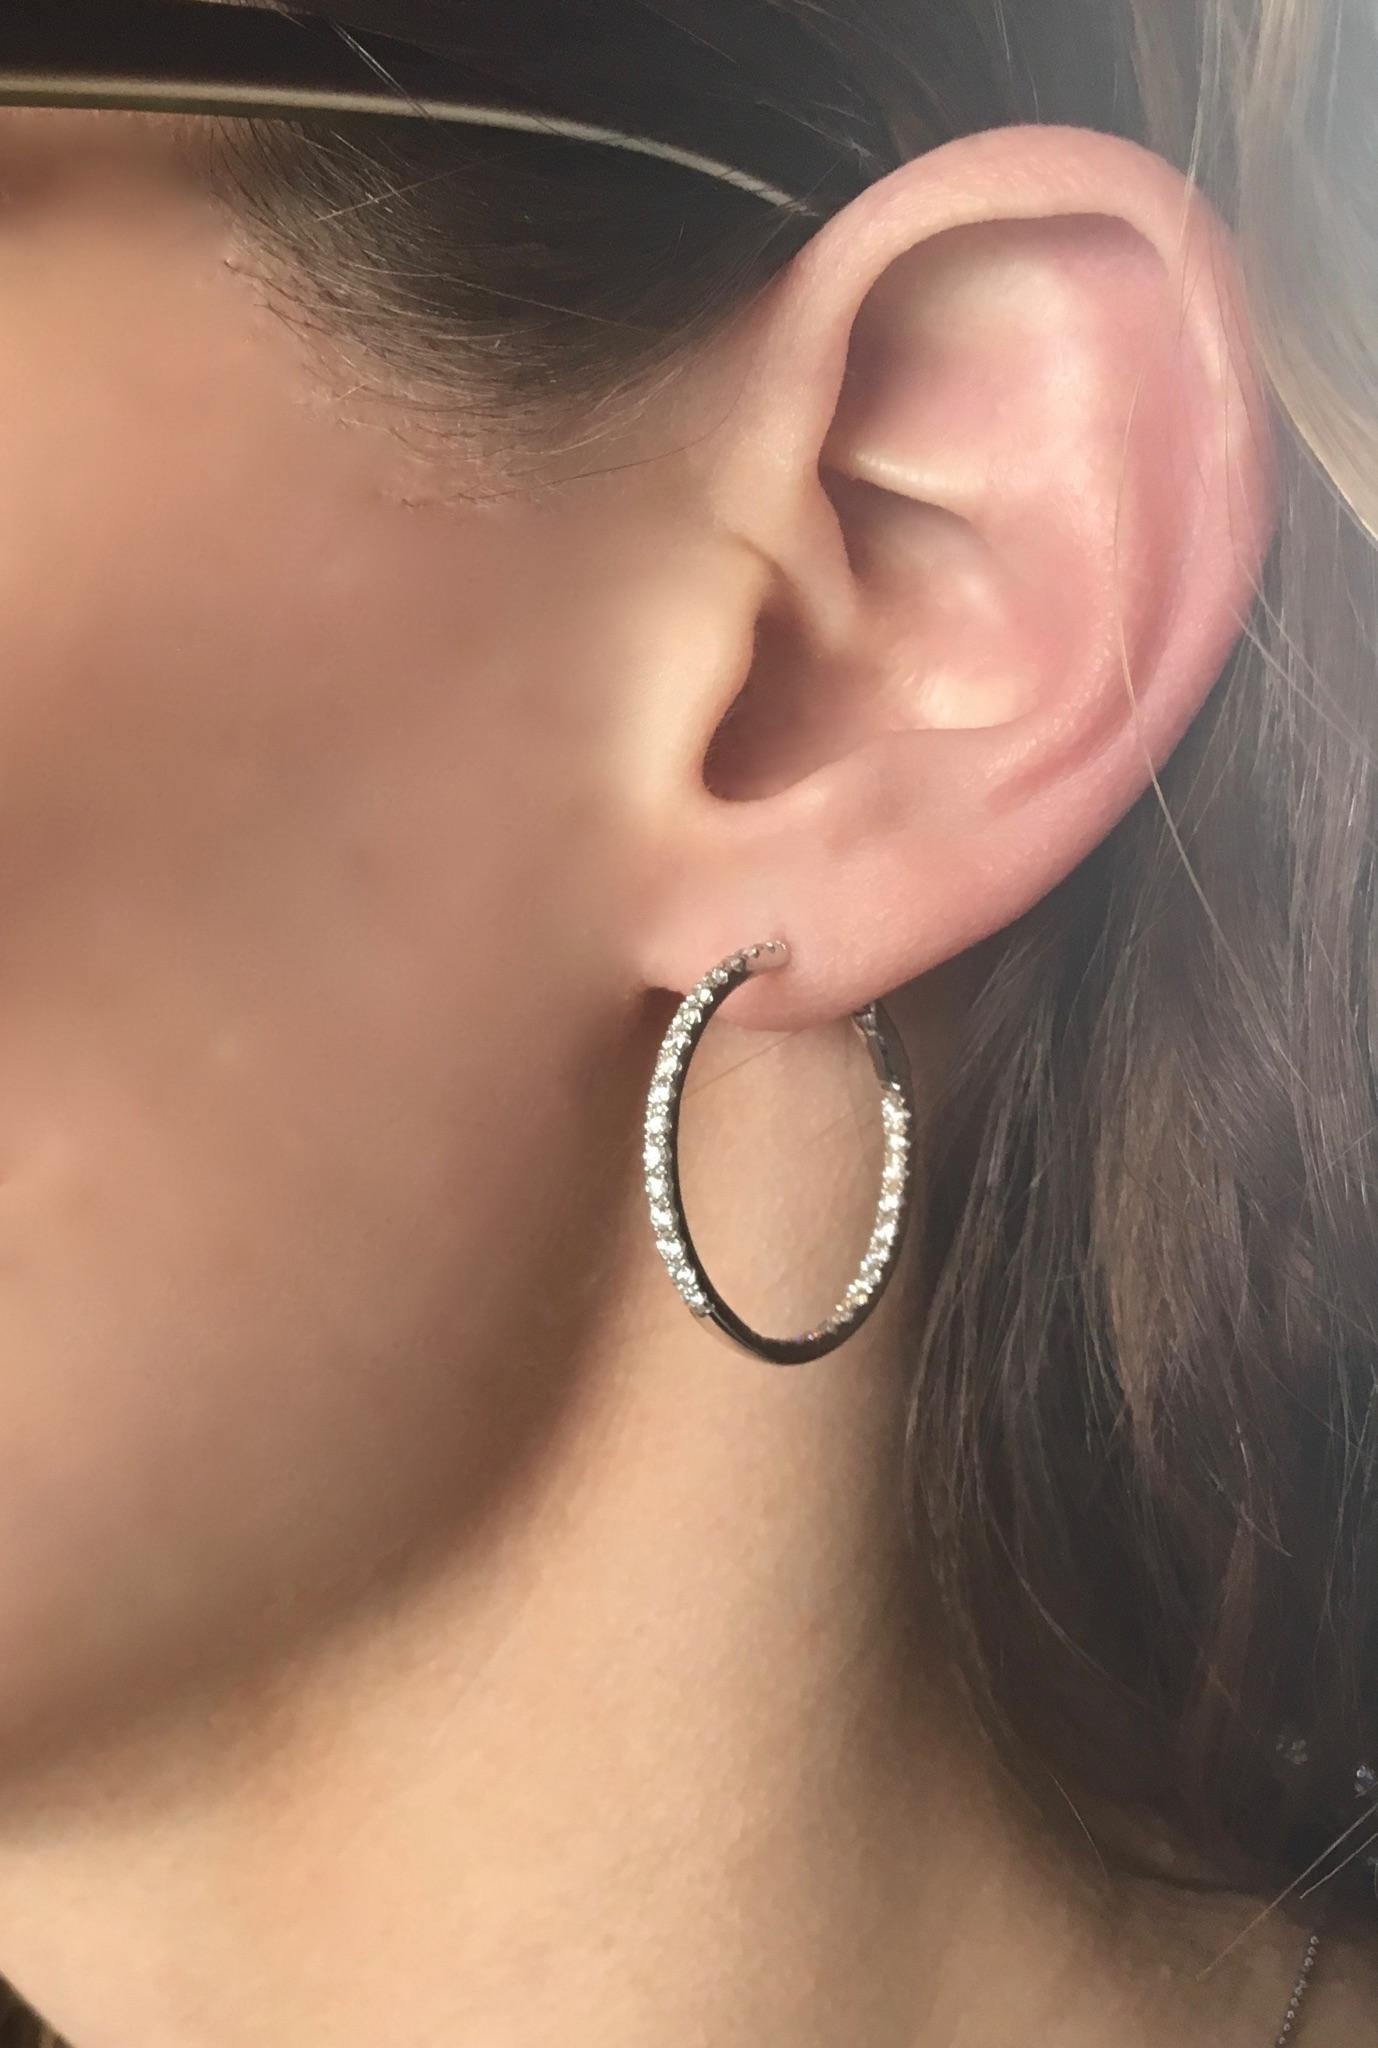 These inside out diamond hoop earrings feature approximately 1.20ctw of Round Brilliant Cut Diamonds set in 14K white gold.

Diamond Carat Weight: Approximately 1.20CTW 
Diamond Cut: 60 Round Brilliant Diamonds
Color: Average G-I
Clarity: Average